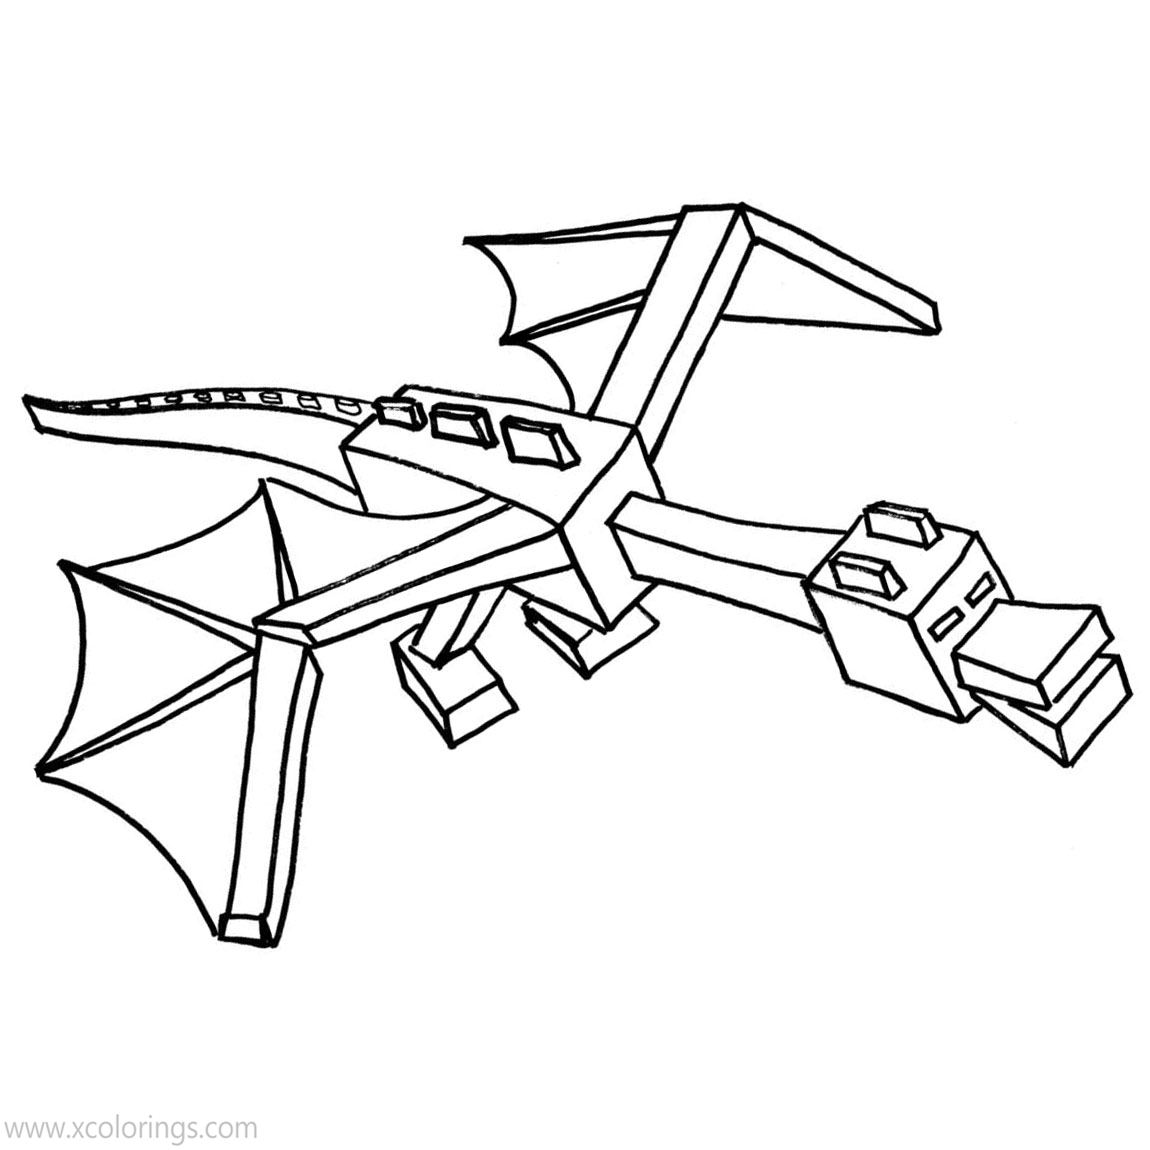 minecraft-coloring-pages-ender-dragon